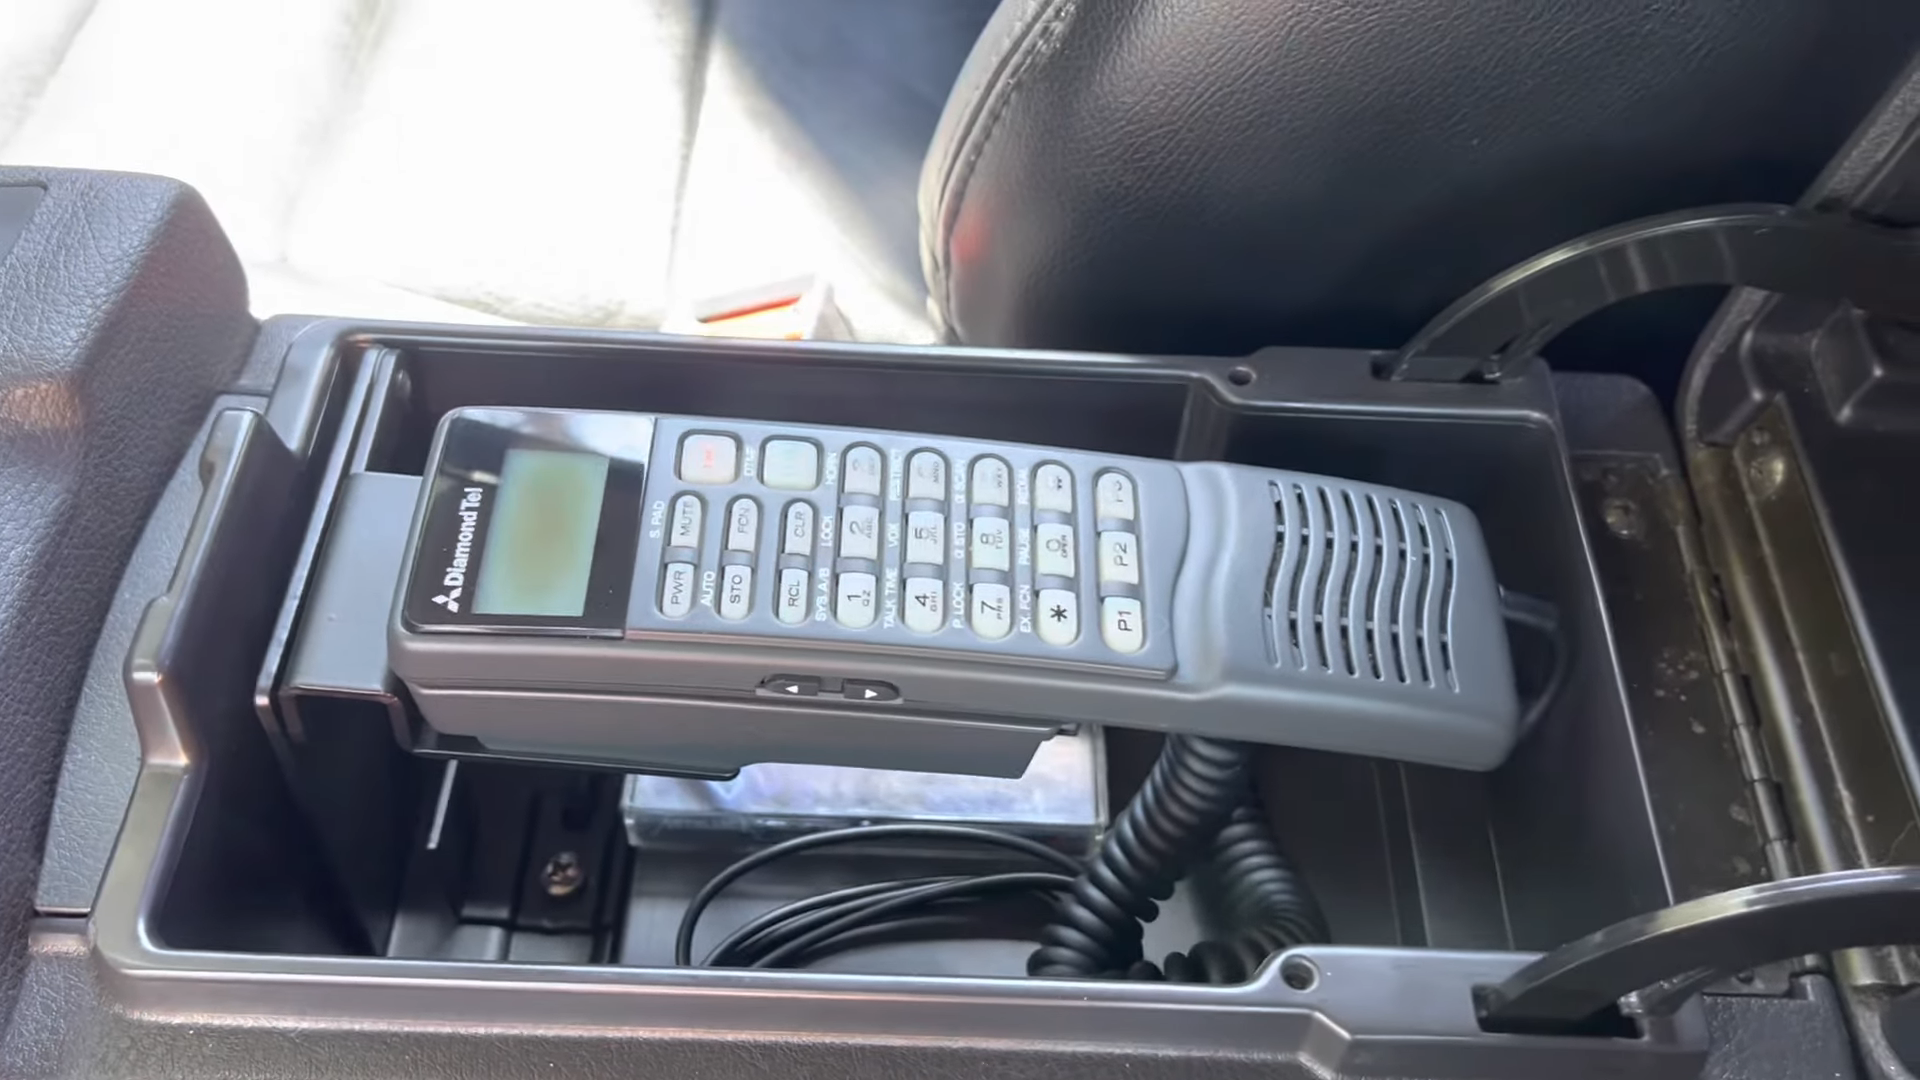 Software Engineer Gets a 1993 Car Phone to Connect to a Modern Smartphone